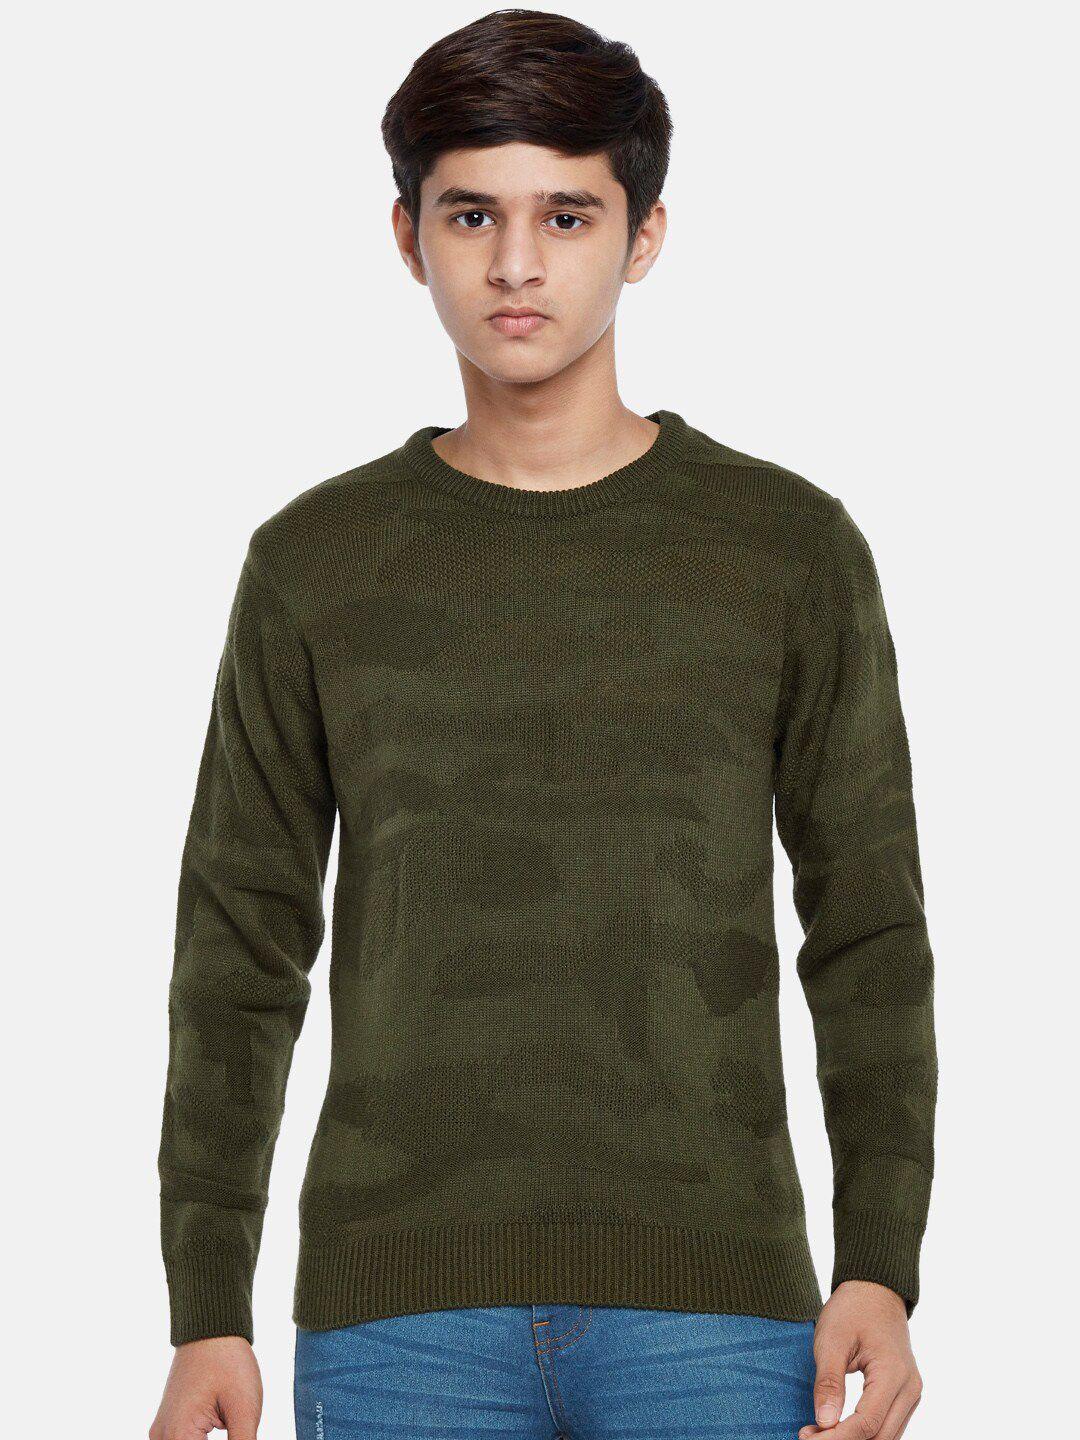 coolsters by pantaloons boys olive green printed pullover